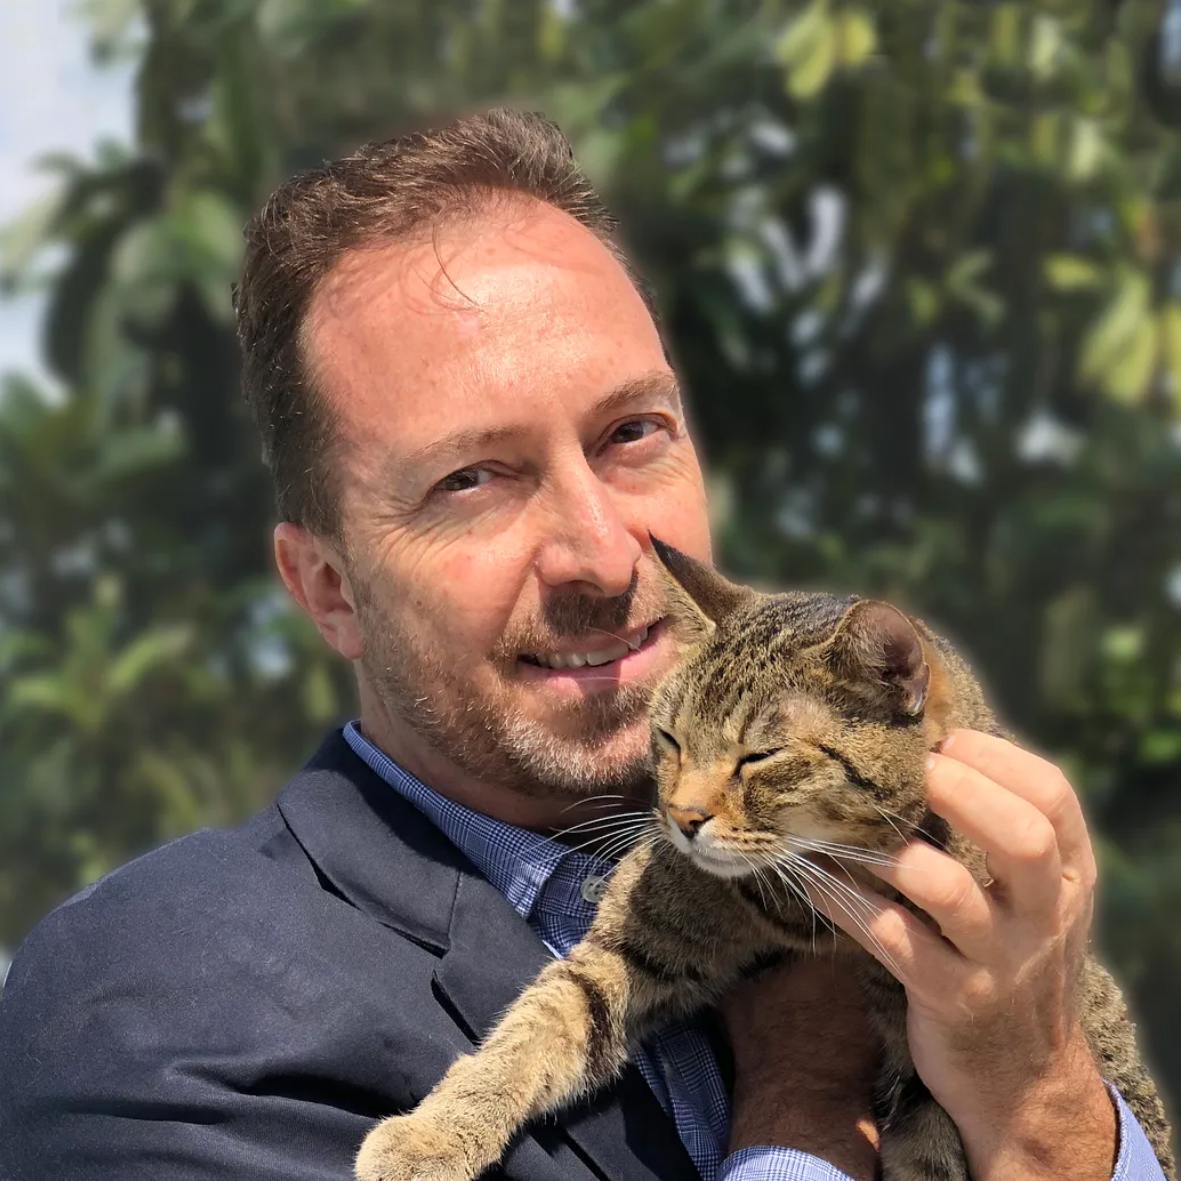 Pets and Mental Wellness: Mario Arbore Of Square Paws On How to Maximize the Mental Health Benefits of Having a Pet